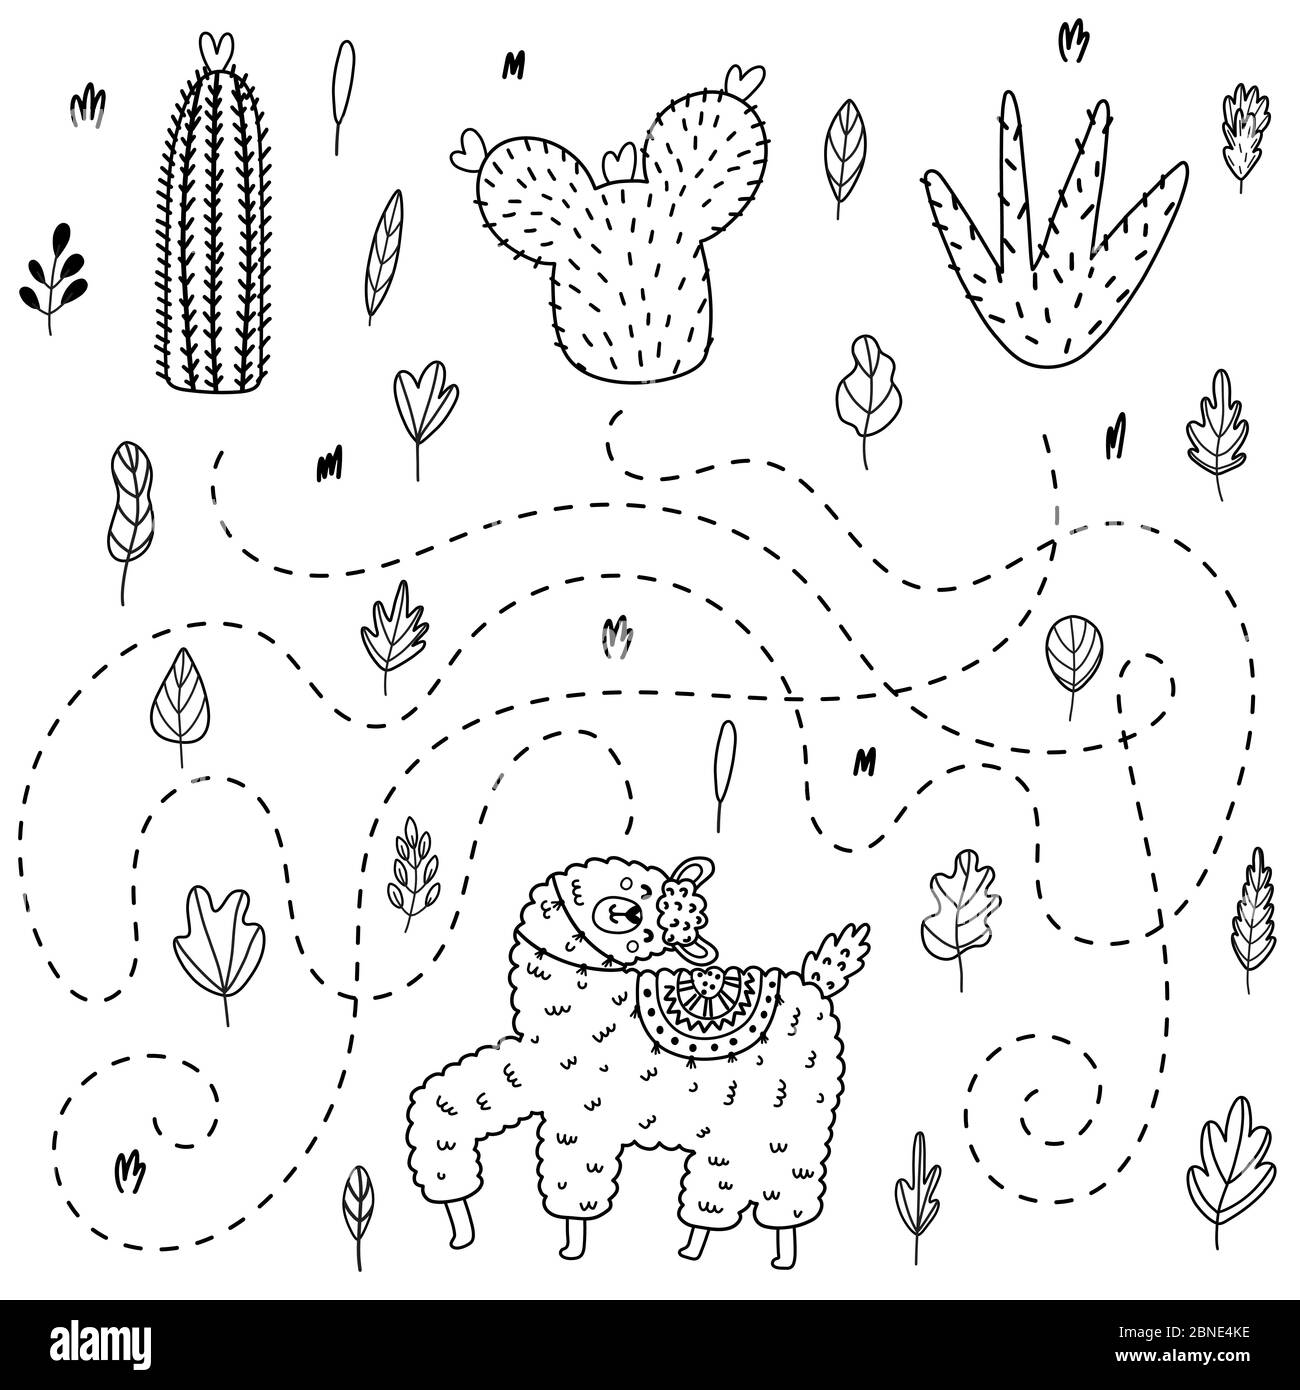 Find out which cactus will get the llama. Outline maze game Stock Vector